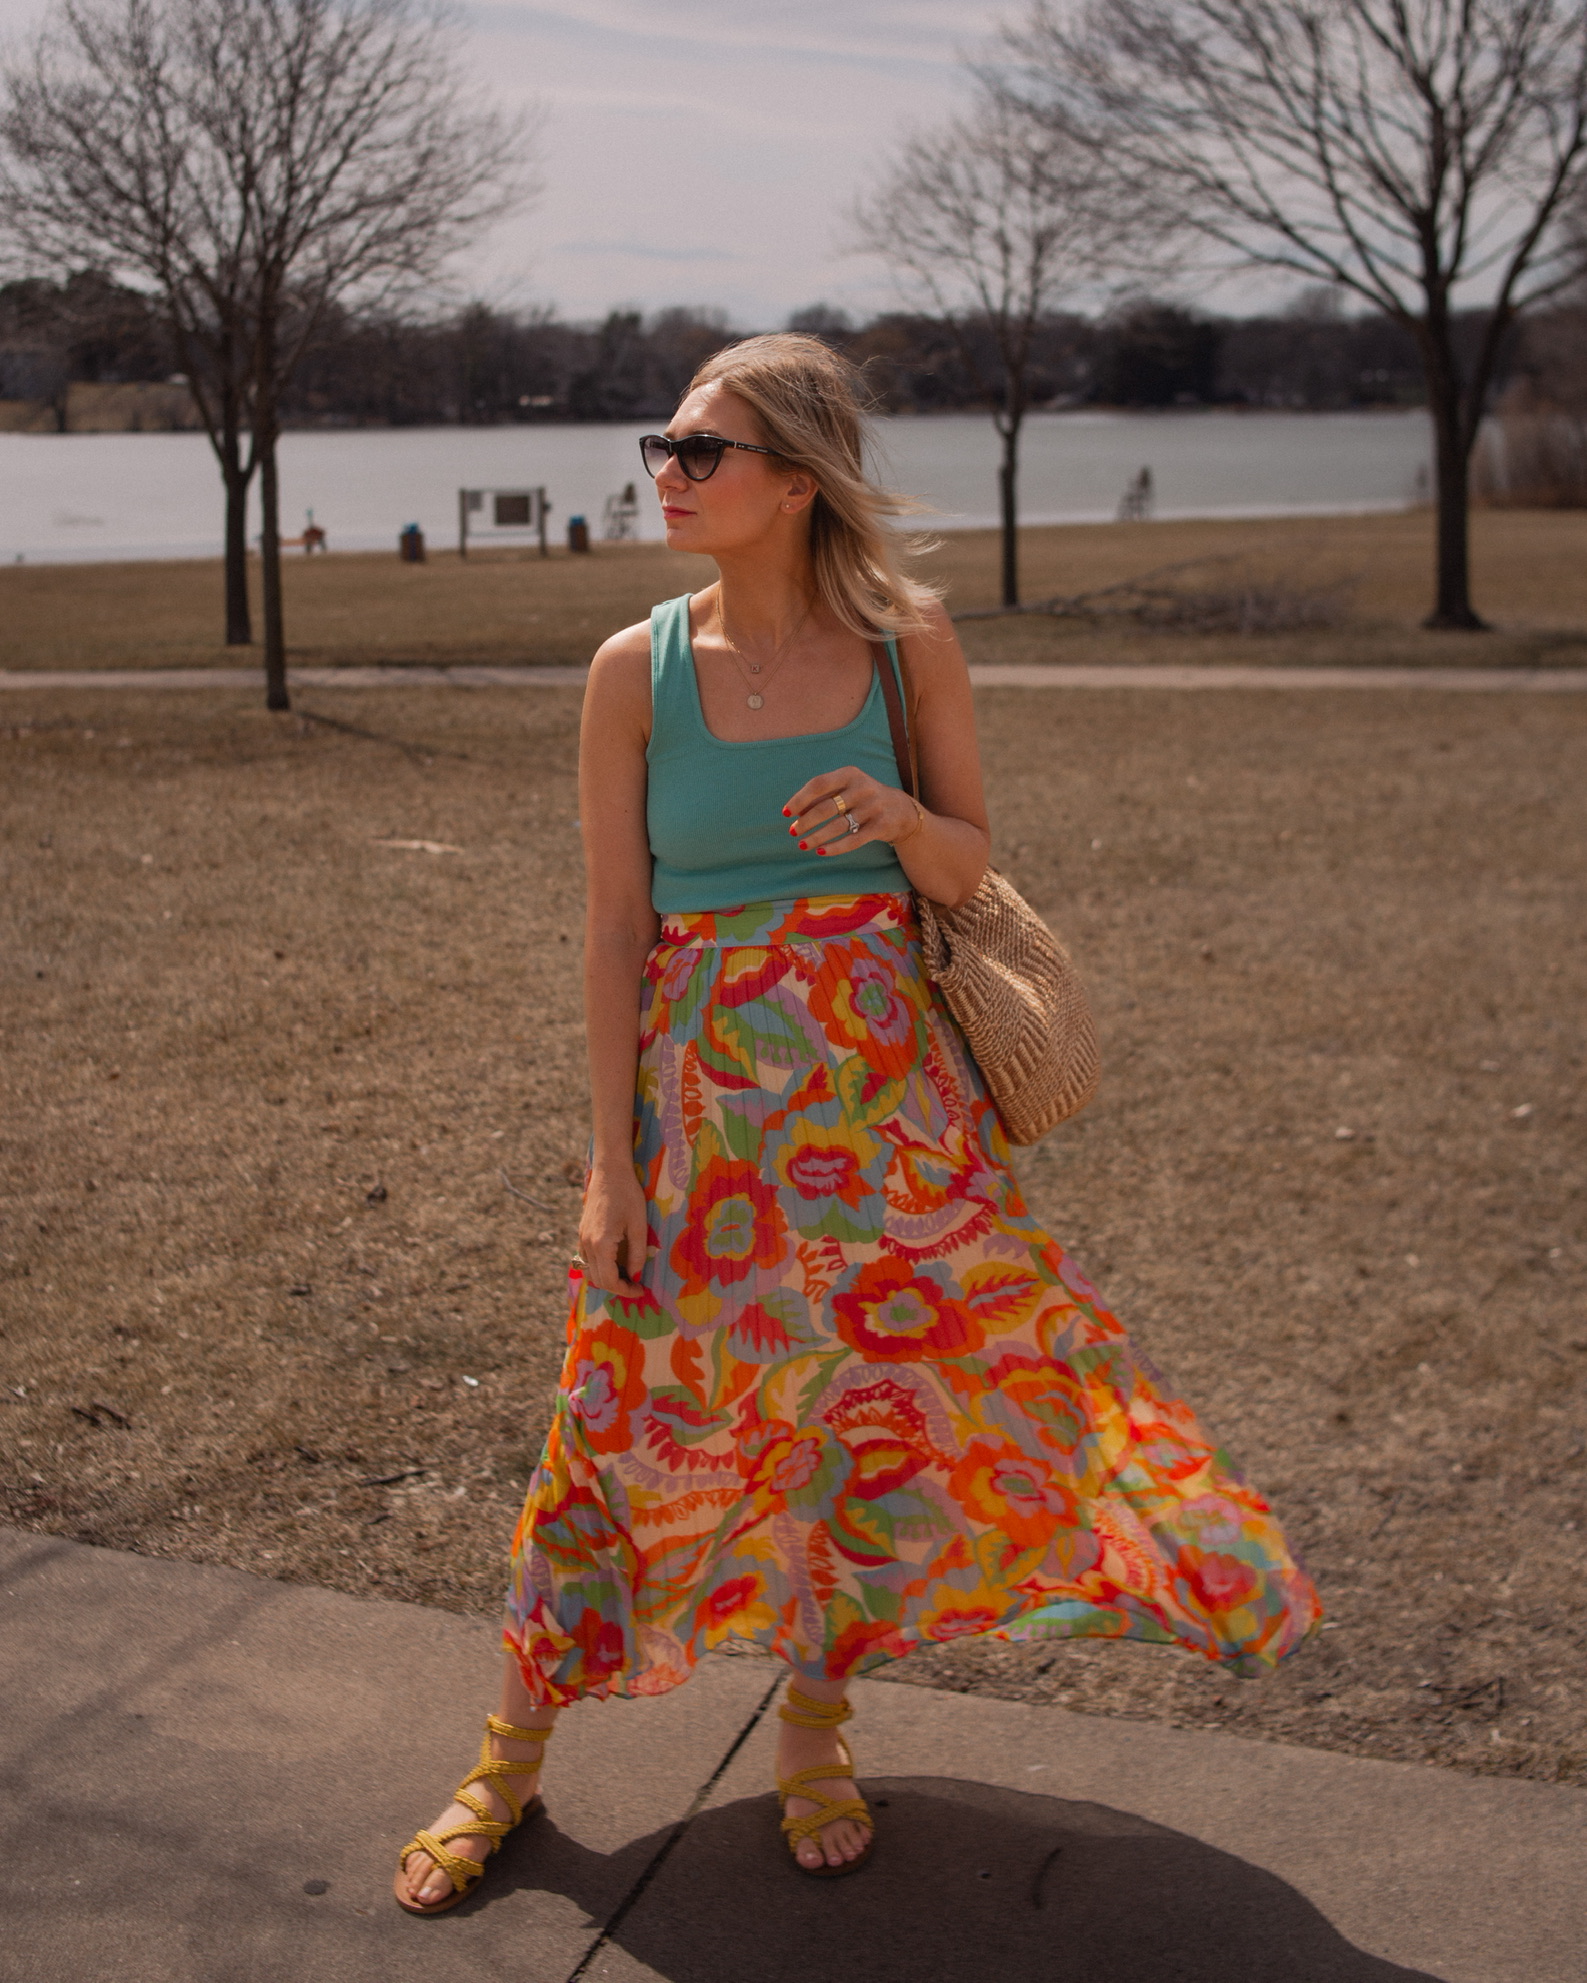 Karin Emily wears a turquoise juan t-shirt from Sezane with A brightly colored floral maxi skirt, yellow sandals,  and Isabel Marant Cat Eye Sunglasses